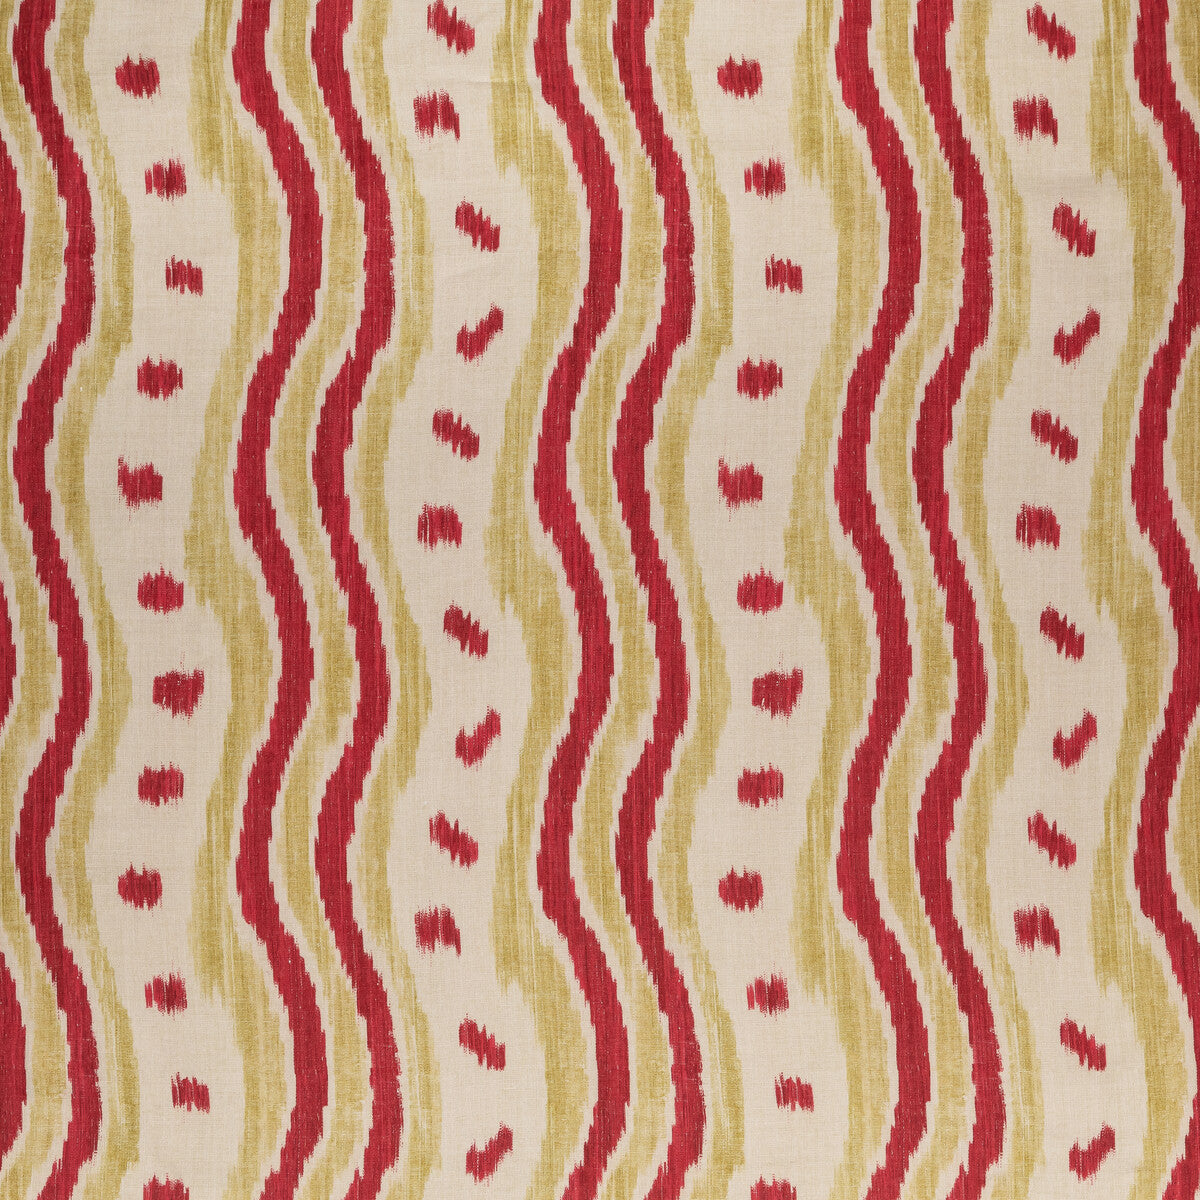 Ikat Stripe fabric in red/green color - pattern BFC-3687.319.0 - by Lee Jofa in the Blithfield collection